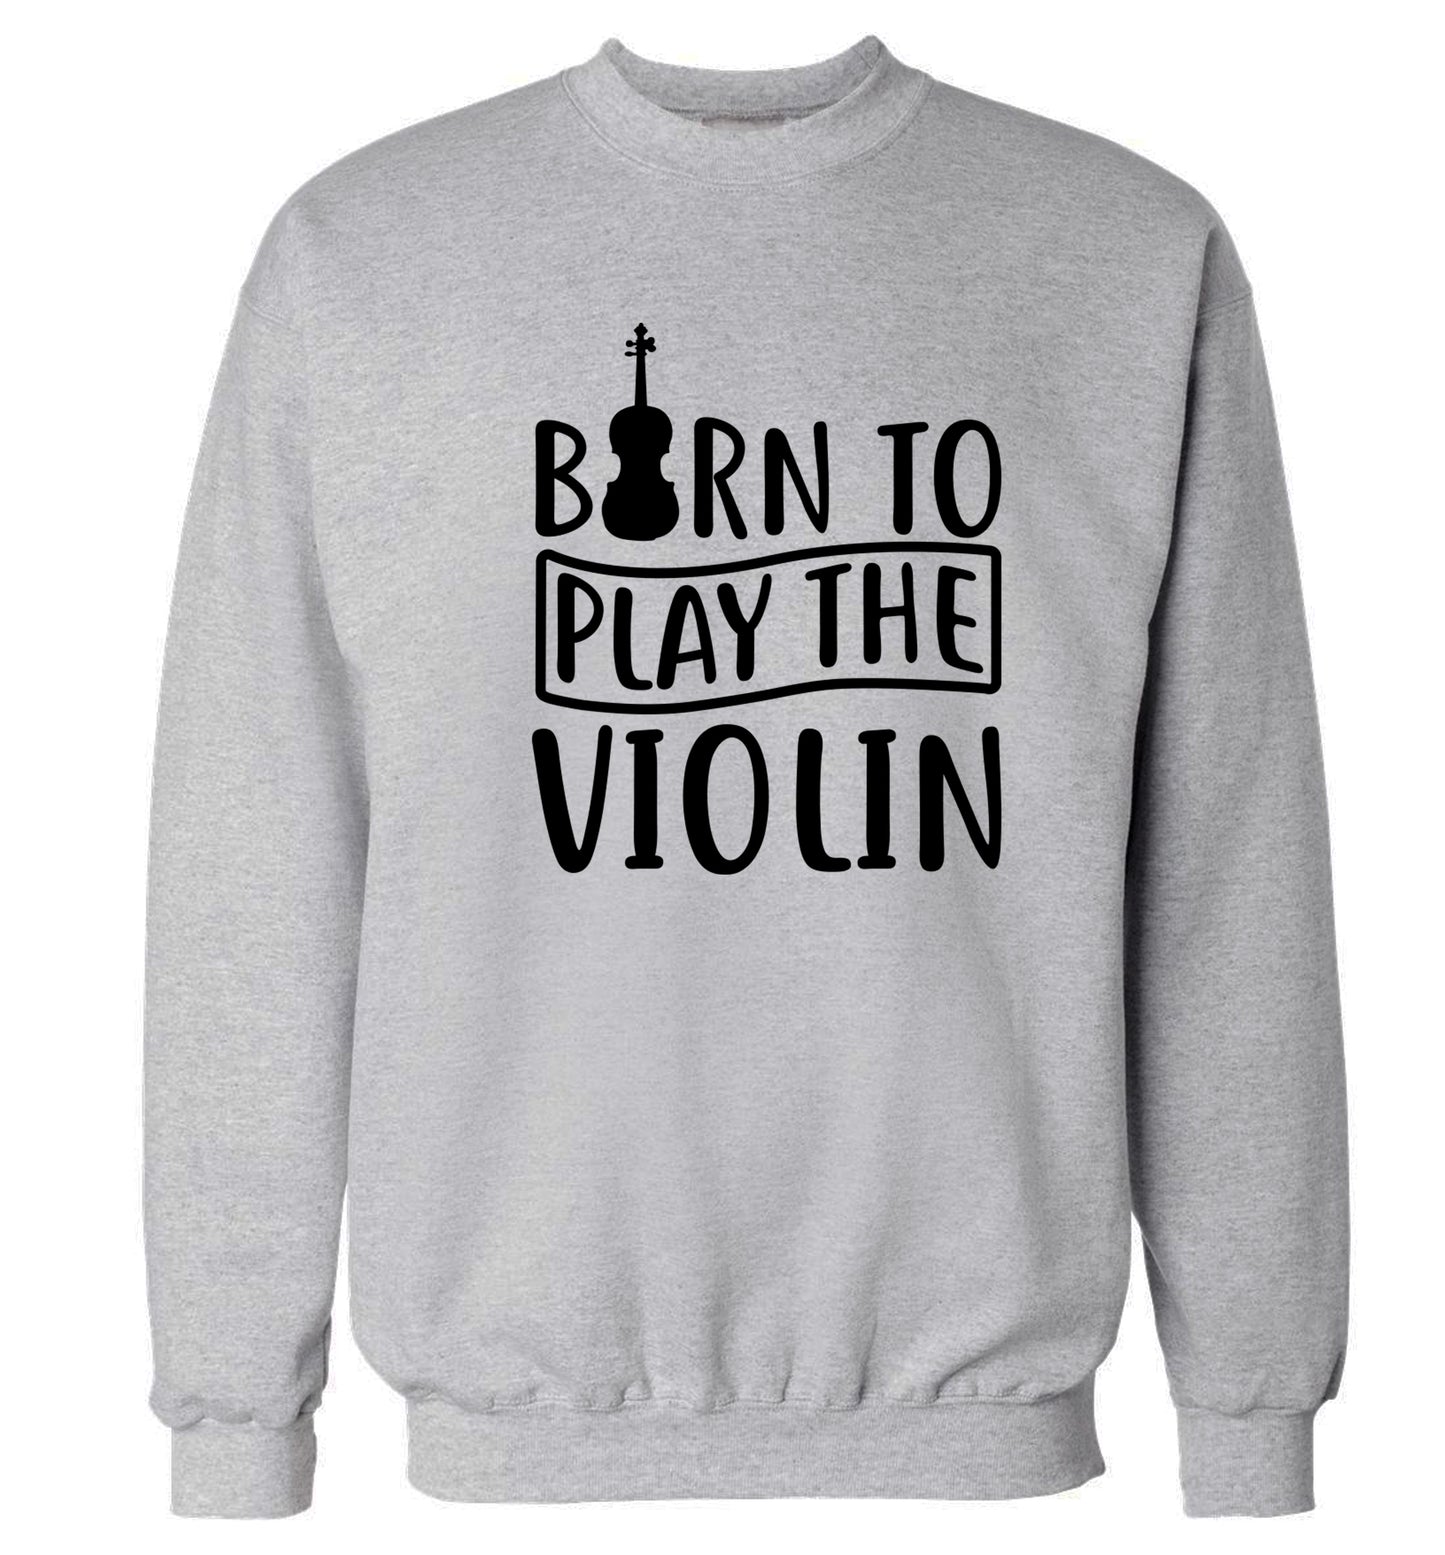 Born to Play the Violin Adult's unisex grey Sweater 2XL